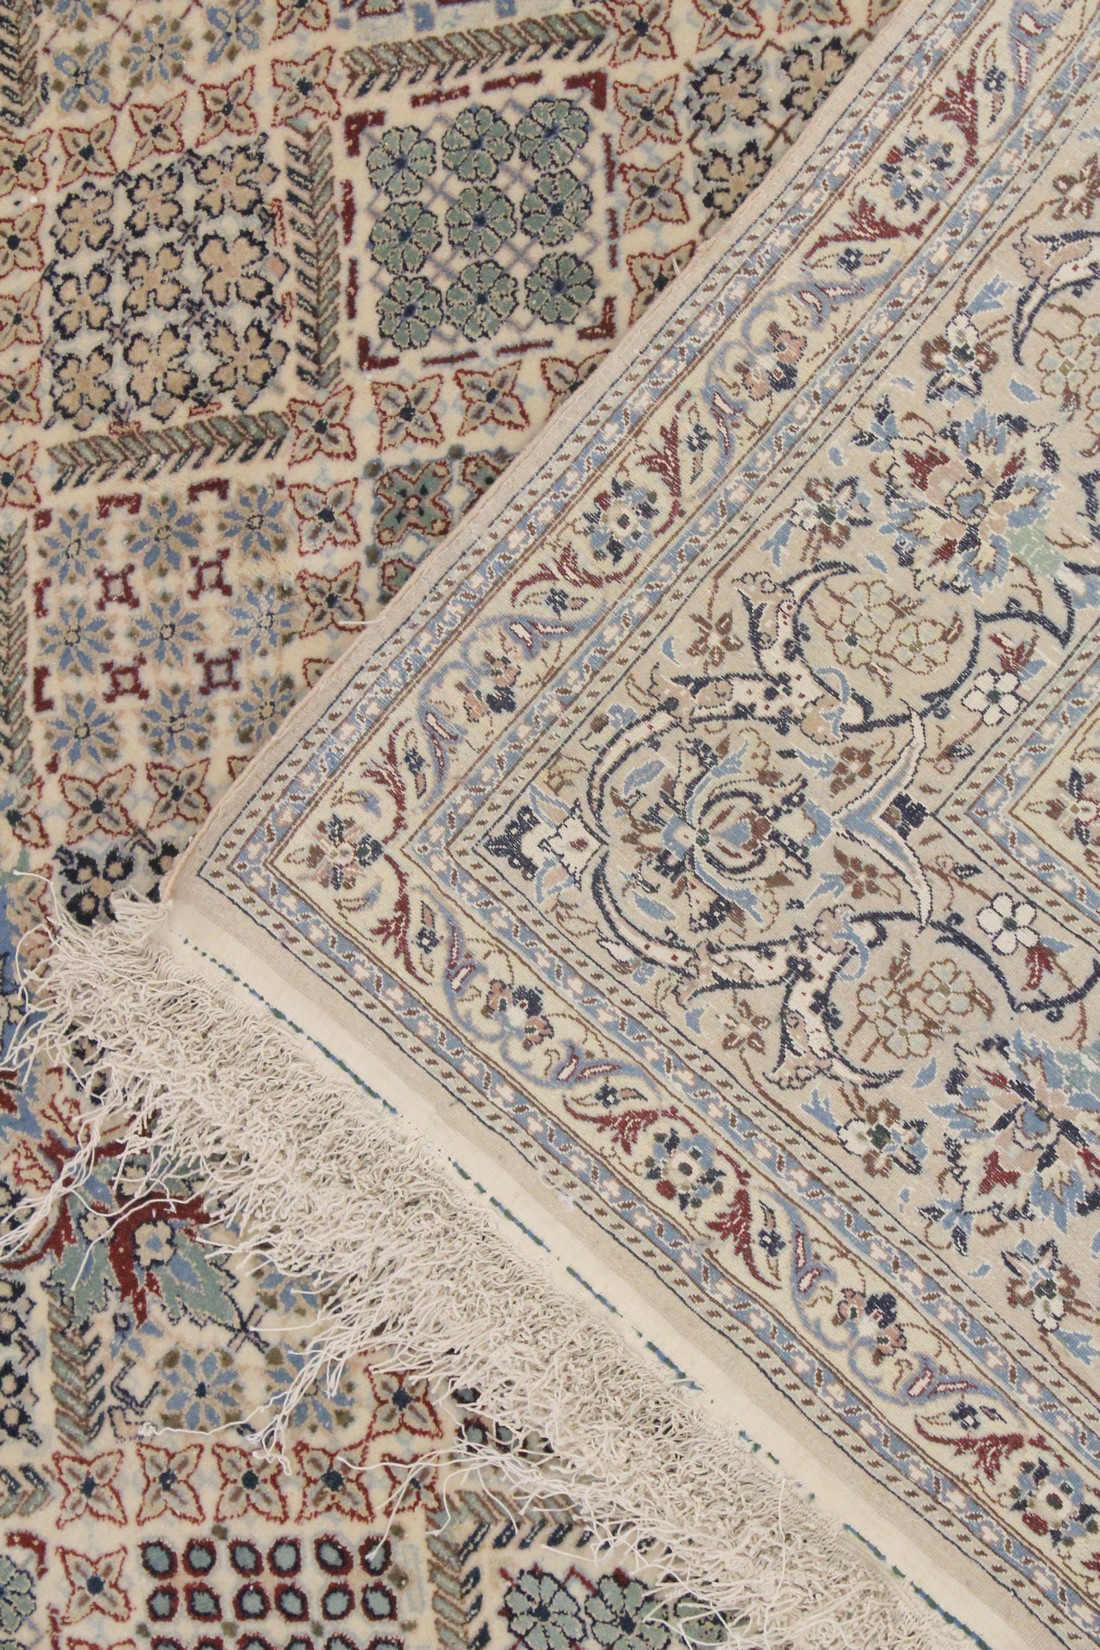 A GOOD PERSIAN NAIRN CARPET beige ground with stylised animals and floral design. 8ft 10ins x 6ft - Image 7 of 7